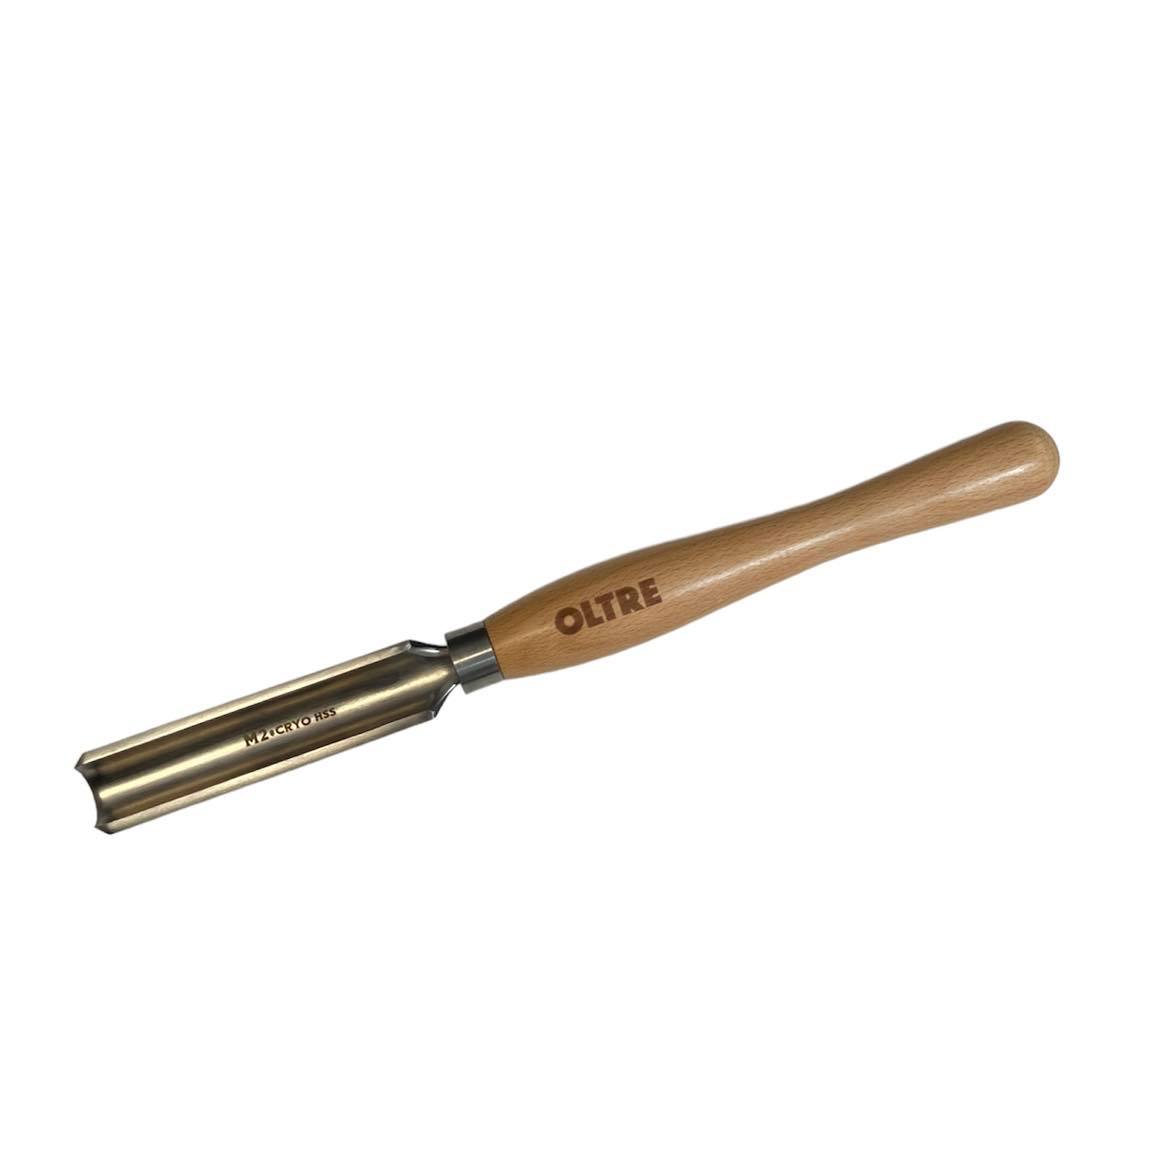 Woodturning Roughing Gouge Tool 28mm by Oltre